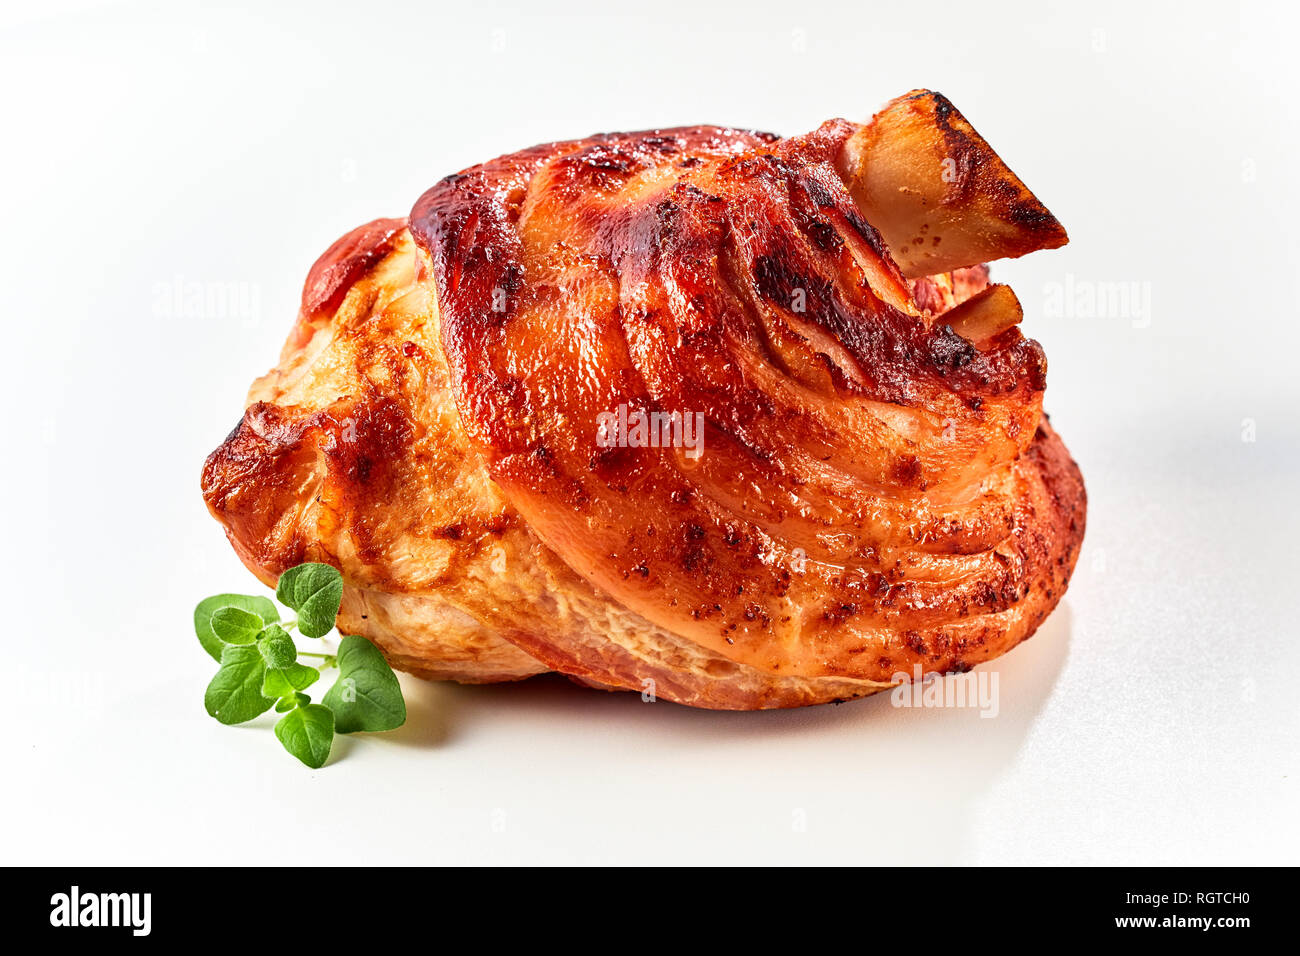 A crispy, golden roasted pork knuckle with a fresh herb garnish on a white background with copy space. Stock Photo